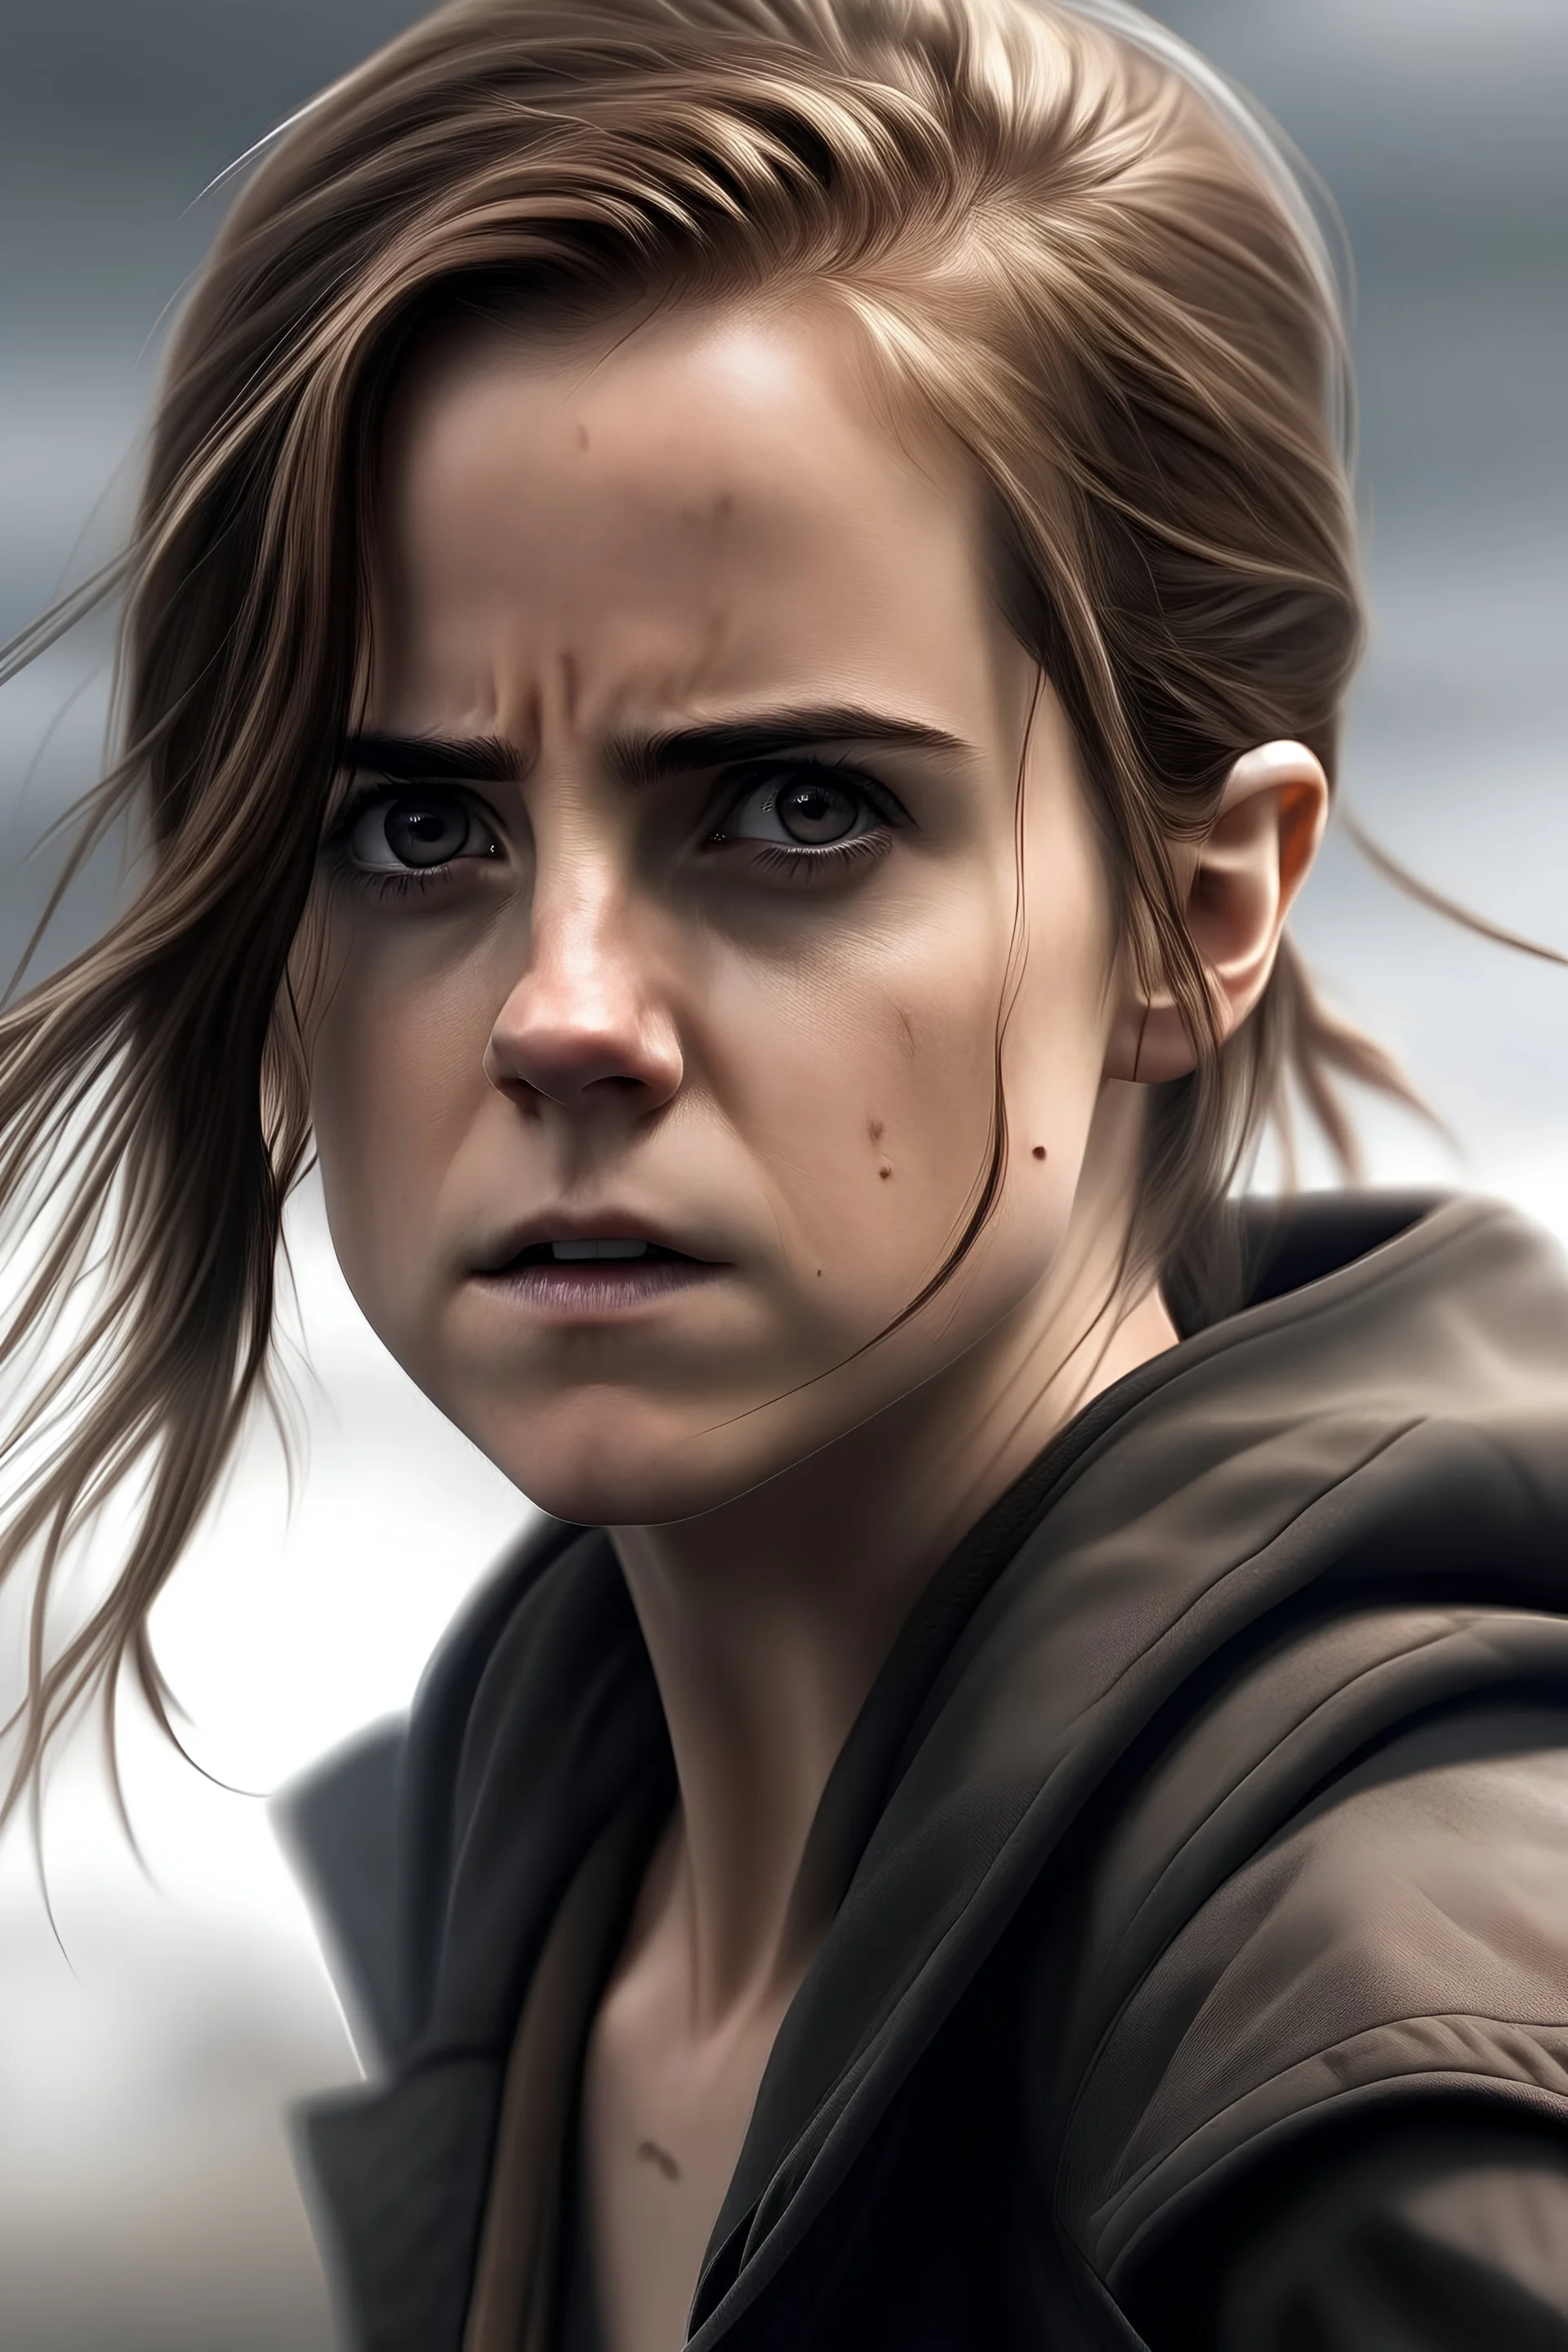 Beautiful Emma Watson, angry face, hight ankle boots, ponytail hair, 4K resolution, Full HD, image, sharp picture, extreme realistic photo